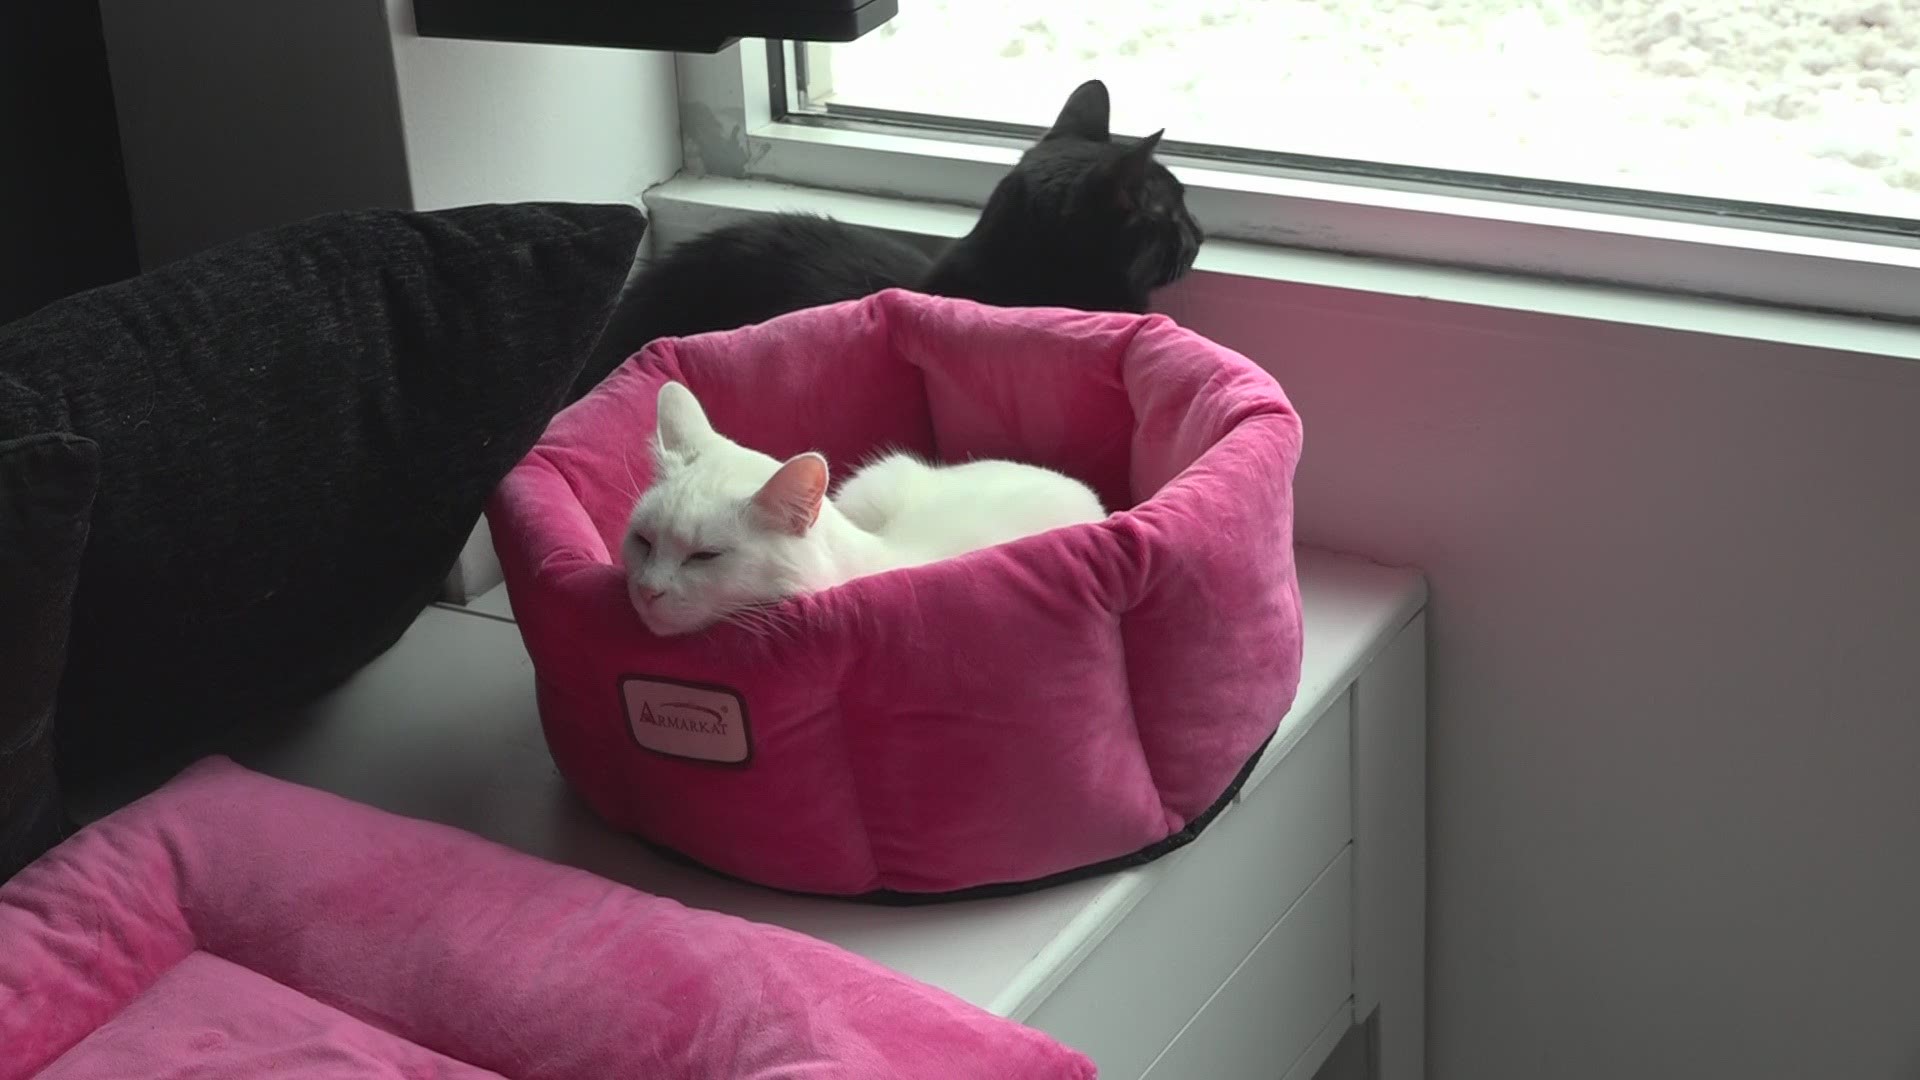 This new year called for a new normal for many businesses. Happy Cat Café answered that call.